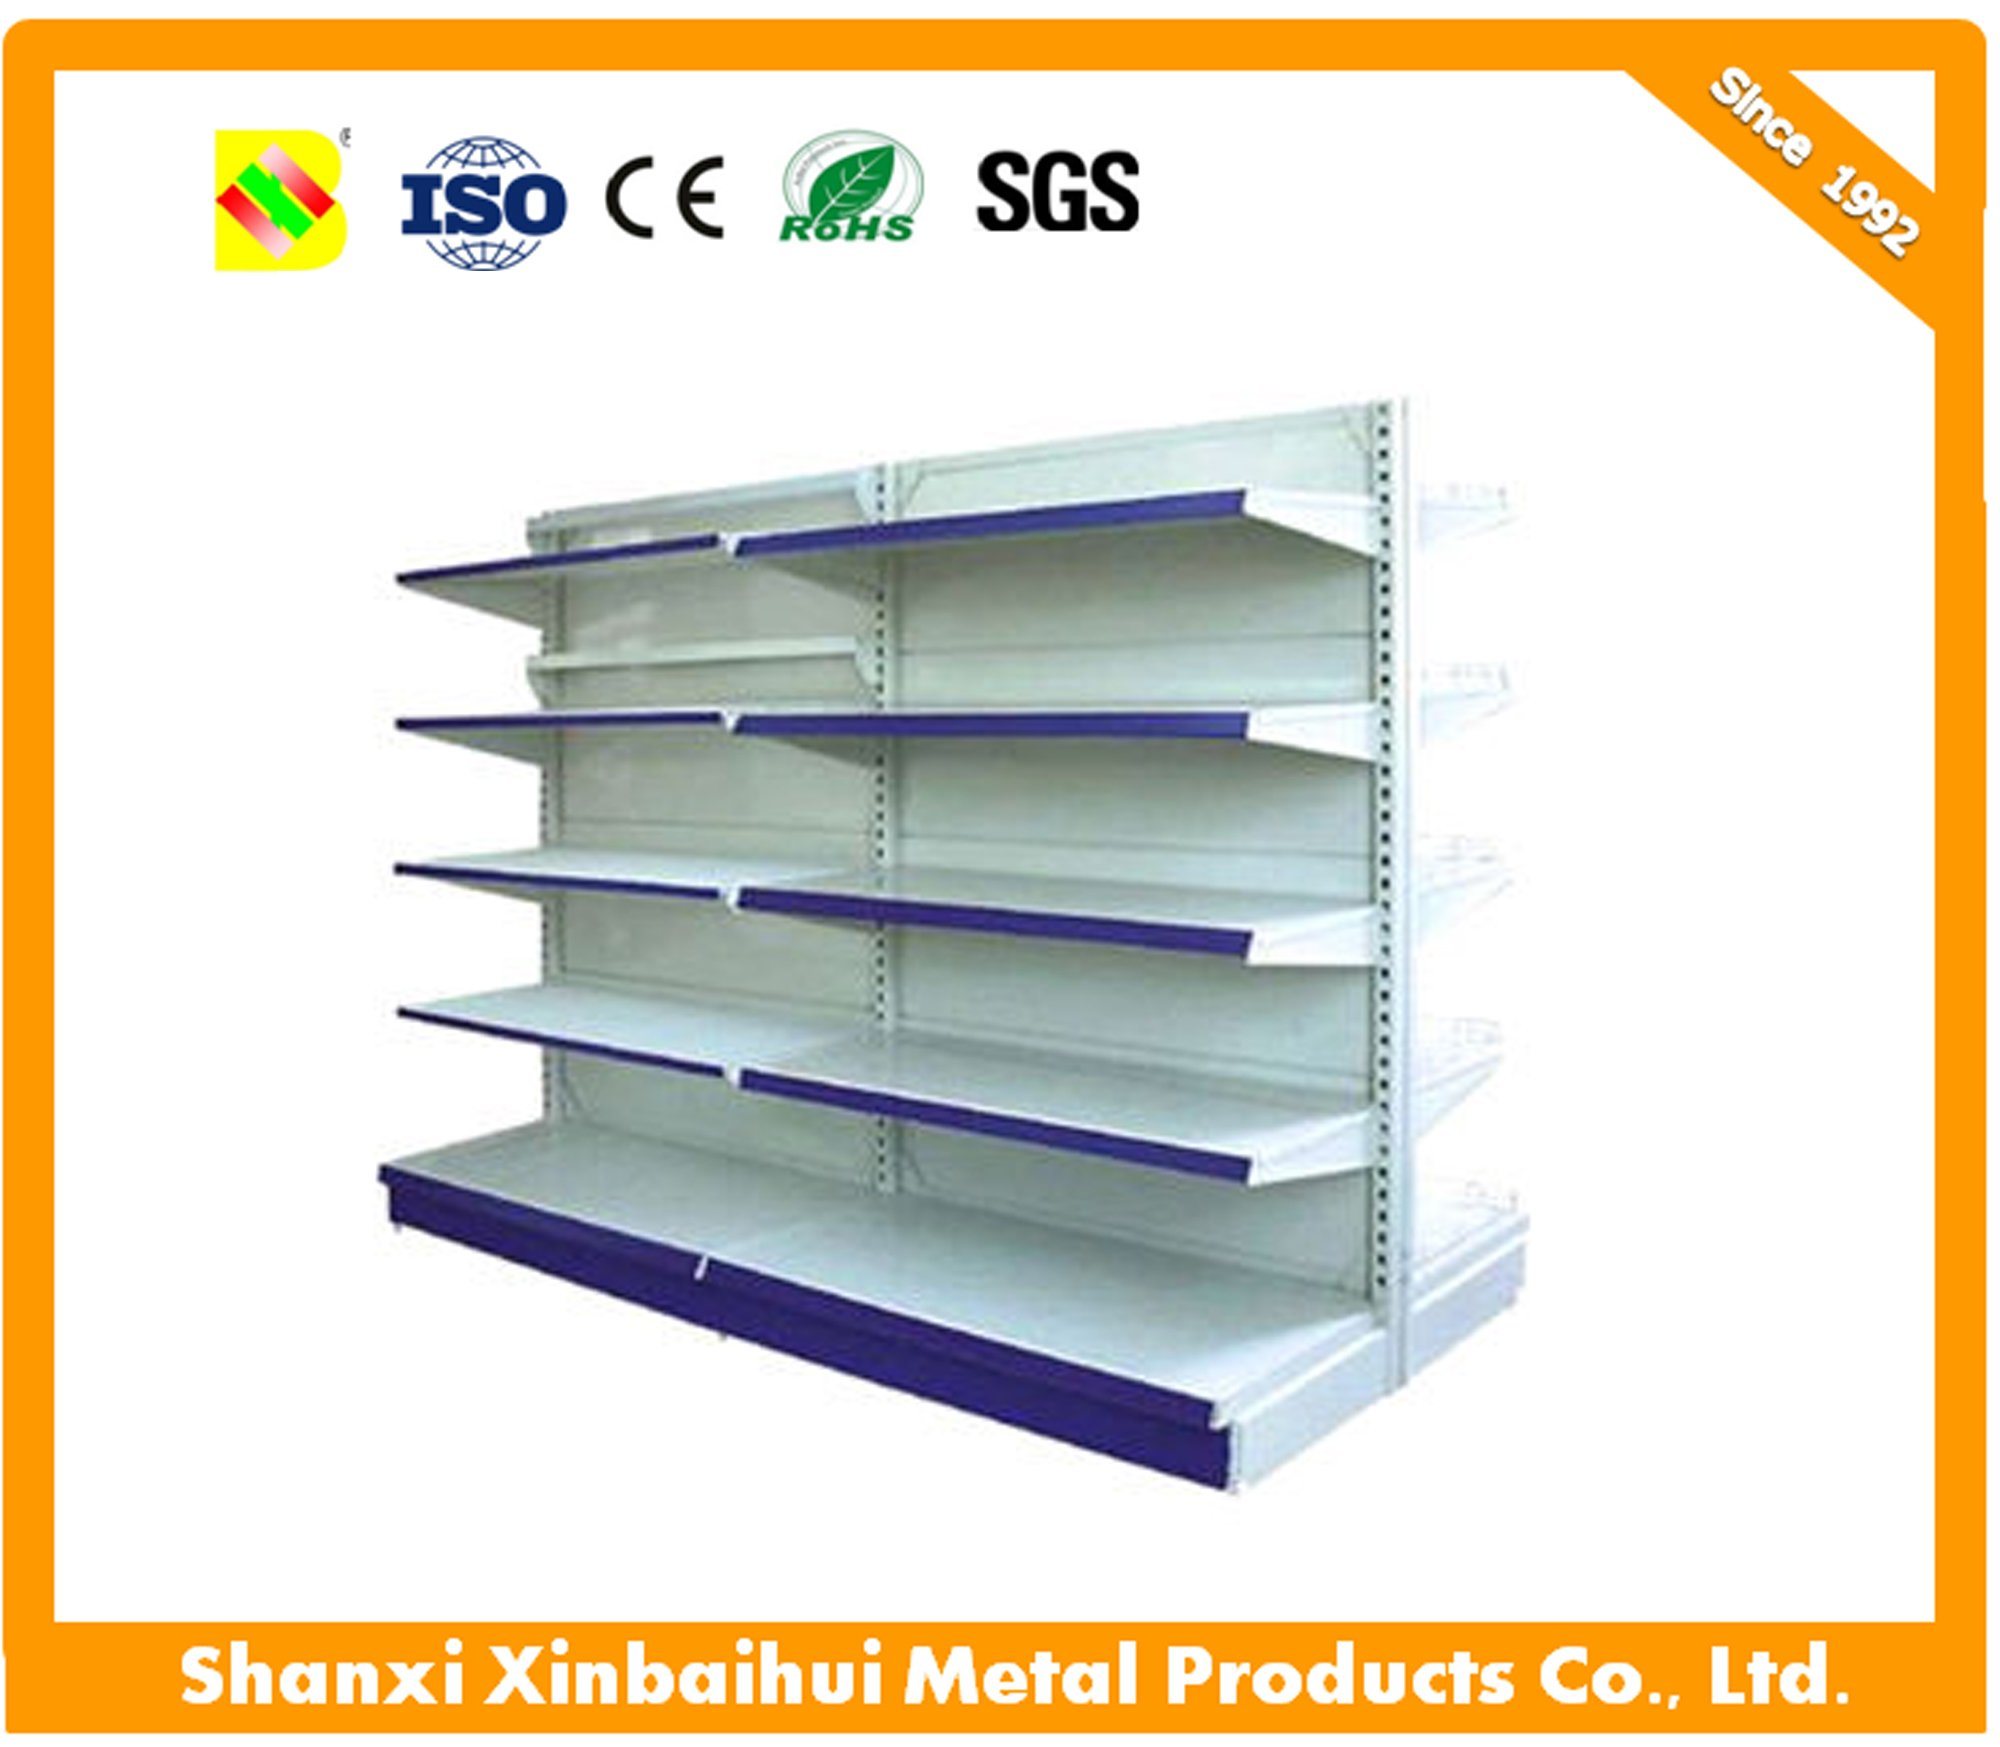 /proimages/2f0j00BjkaHAzYCwgp/supermarket-metal-shelf-oem-orders-are-welcome-available-in-various-sizes-and-colors.jpg